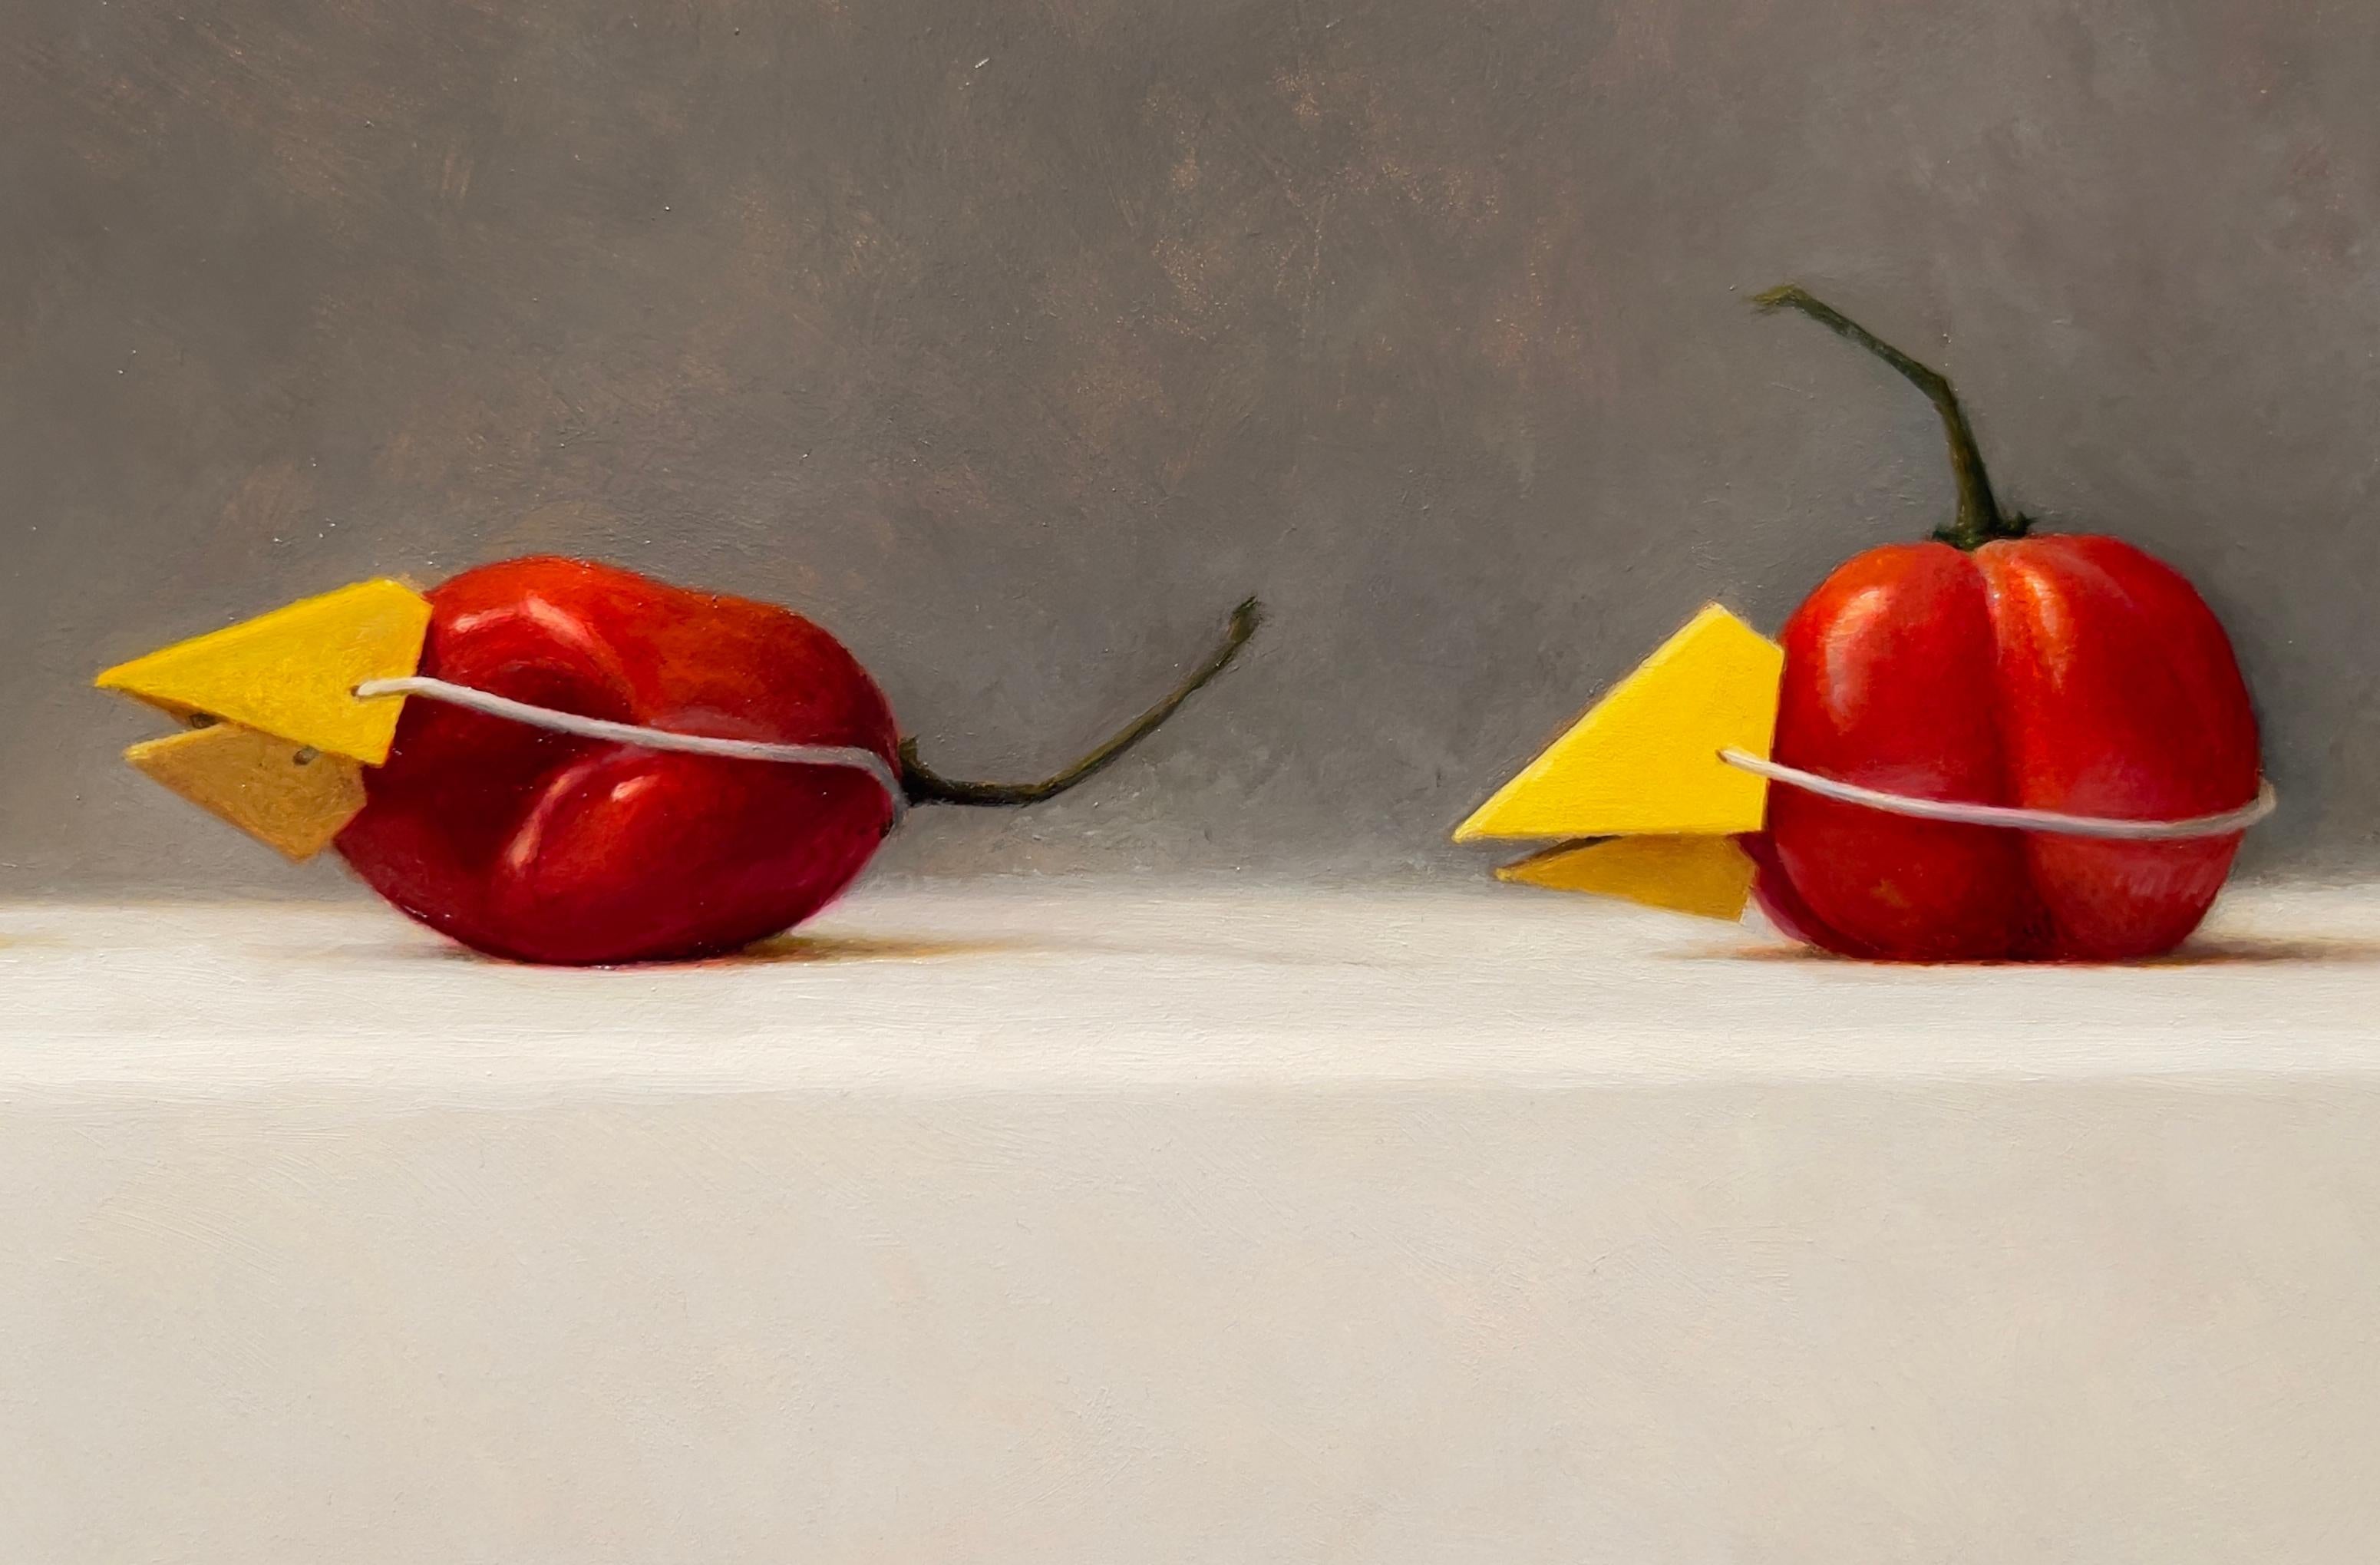 IMPOSTERS #24 (Devil Duck and Habanero Peppers) - Humorous Still Life / Realism  - Black Still-Life Painting by Samuel Hung